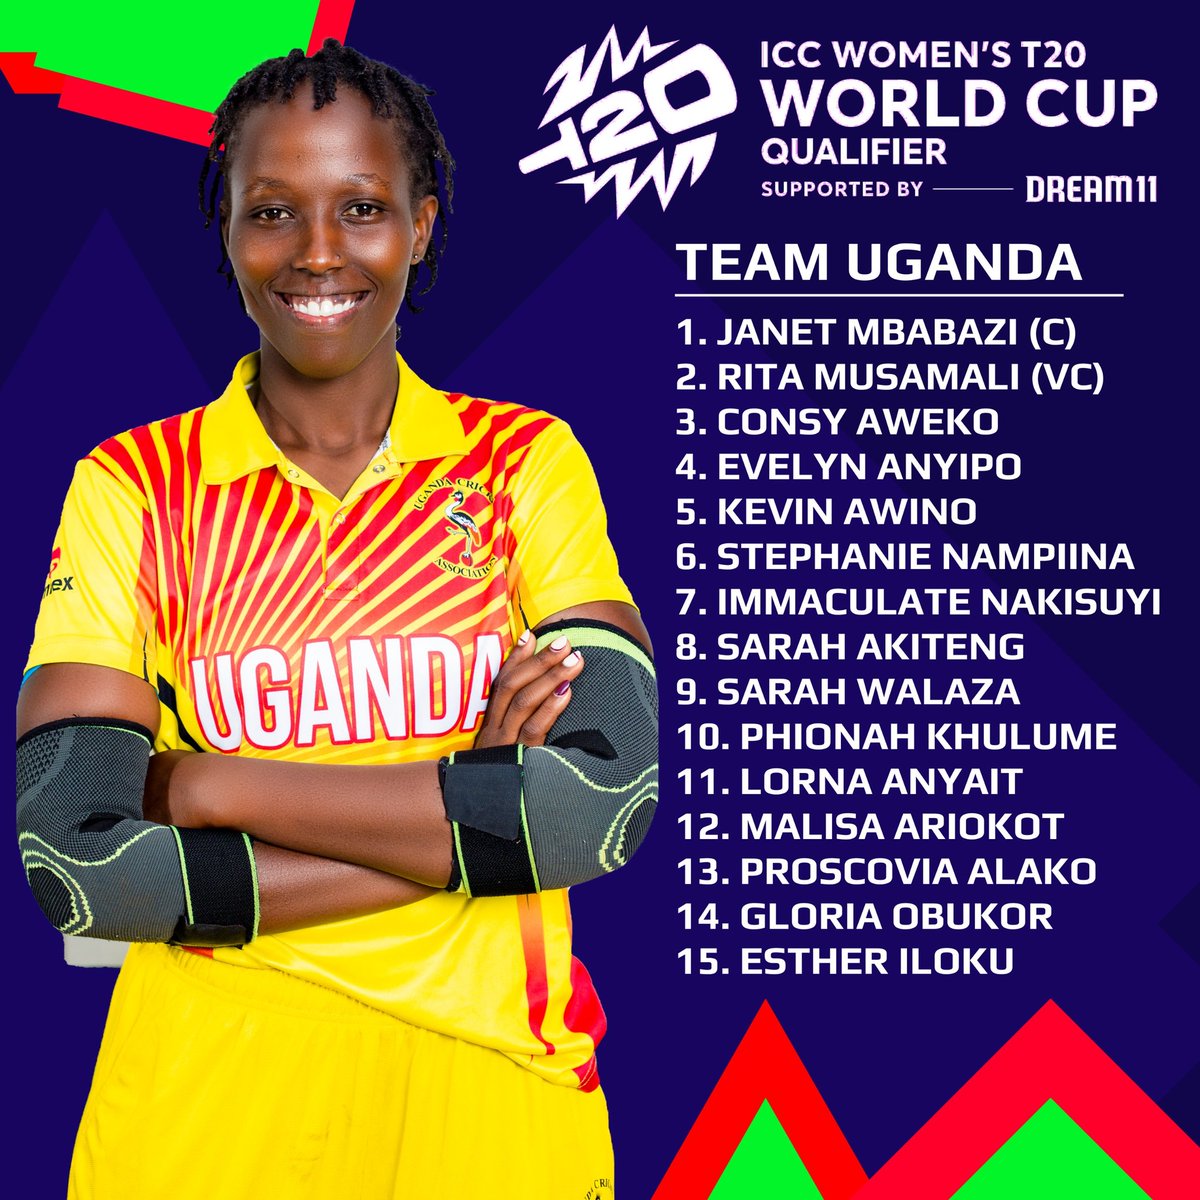 The Victoria Pearls final 15 for the T20 Women's Global Qualifiers. Proscovia Alako returns in the place of Immaculate Nandera. Janet Mbabazi takes over as Captain replacing Consy Aweko. Rita Musamali is the new vice captain of the side. #LetsGoVictoriaPearls